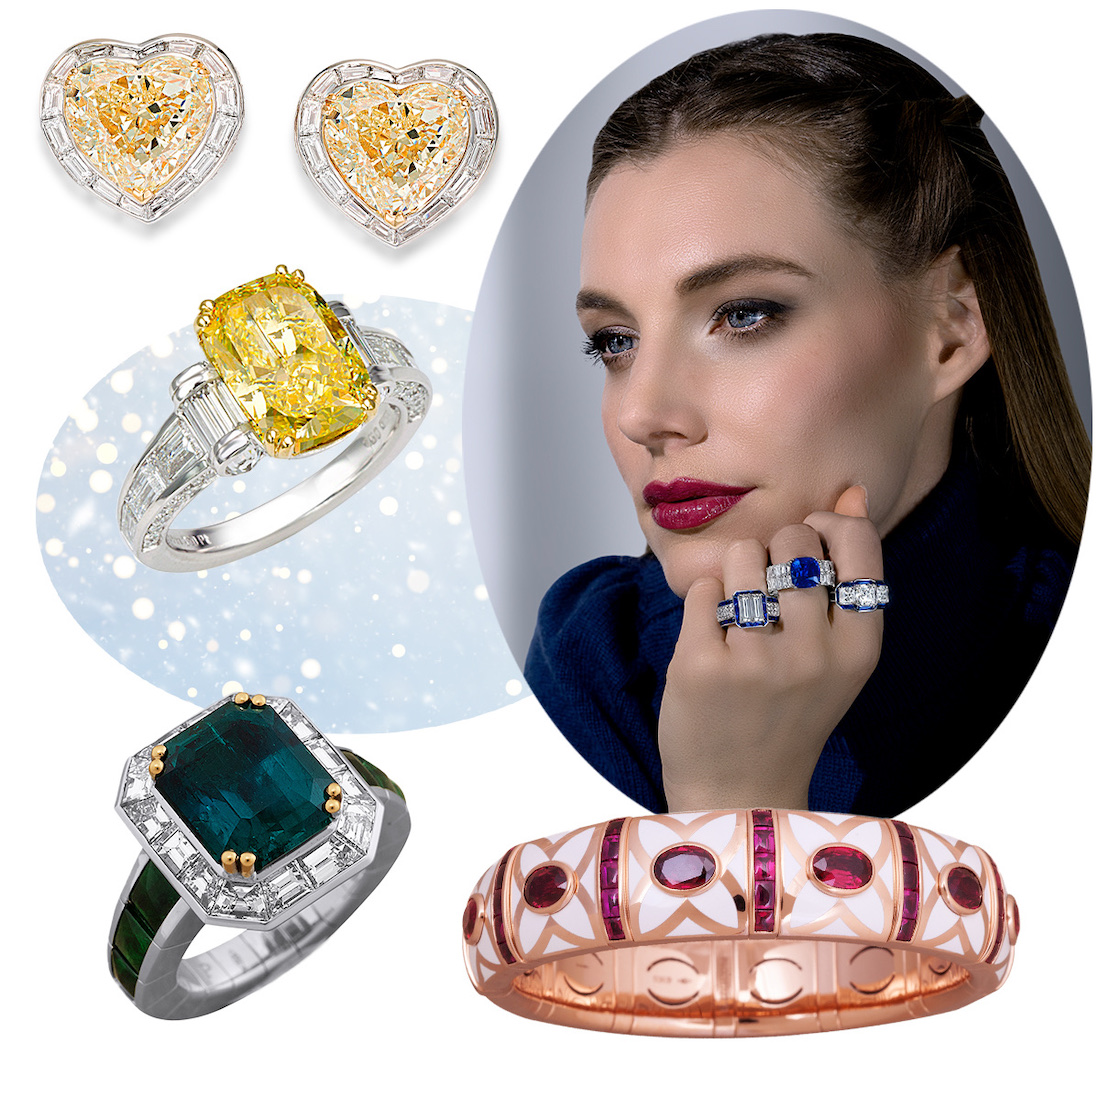 Clockwise from upper right – model wearing PICCHIOTTI Xpandable Sapphire cocktail rings, PICCHIOTTI Gem Ceramic Ruby bracelet, PICCHIOTTI Xpandable Emerald and Diamond ring, PICCHIOTTI Xpandable Yellow Diamond engagement ring, PICCHIOTTI Masterpieces Fancy Yellow Diamond Heart earrings 